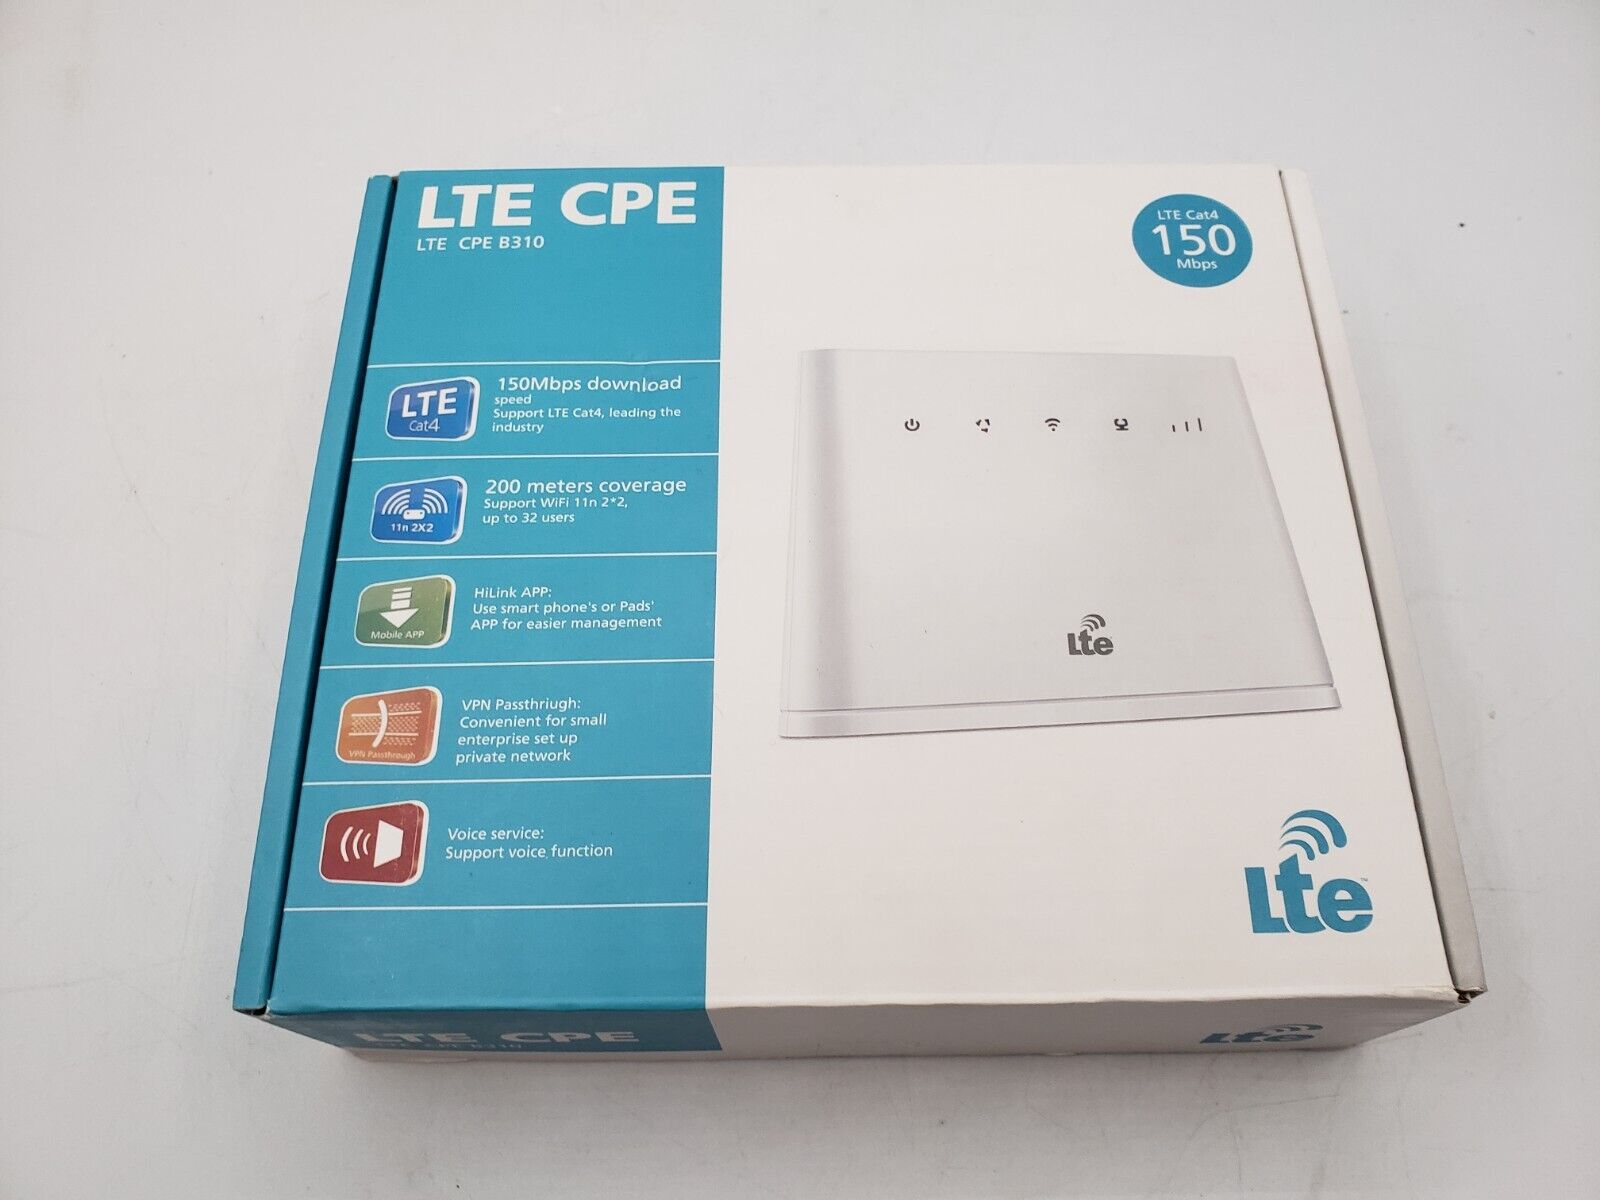 Huawei B310S-518 4G LTE CPE With LTE, White, Open Box.